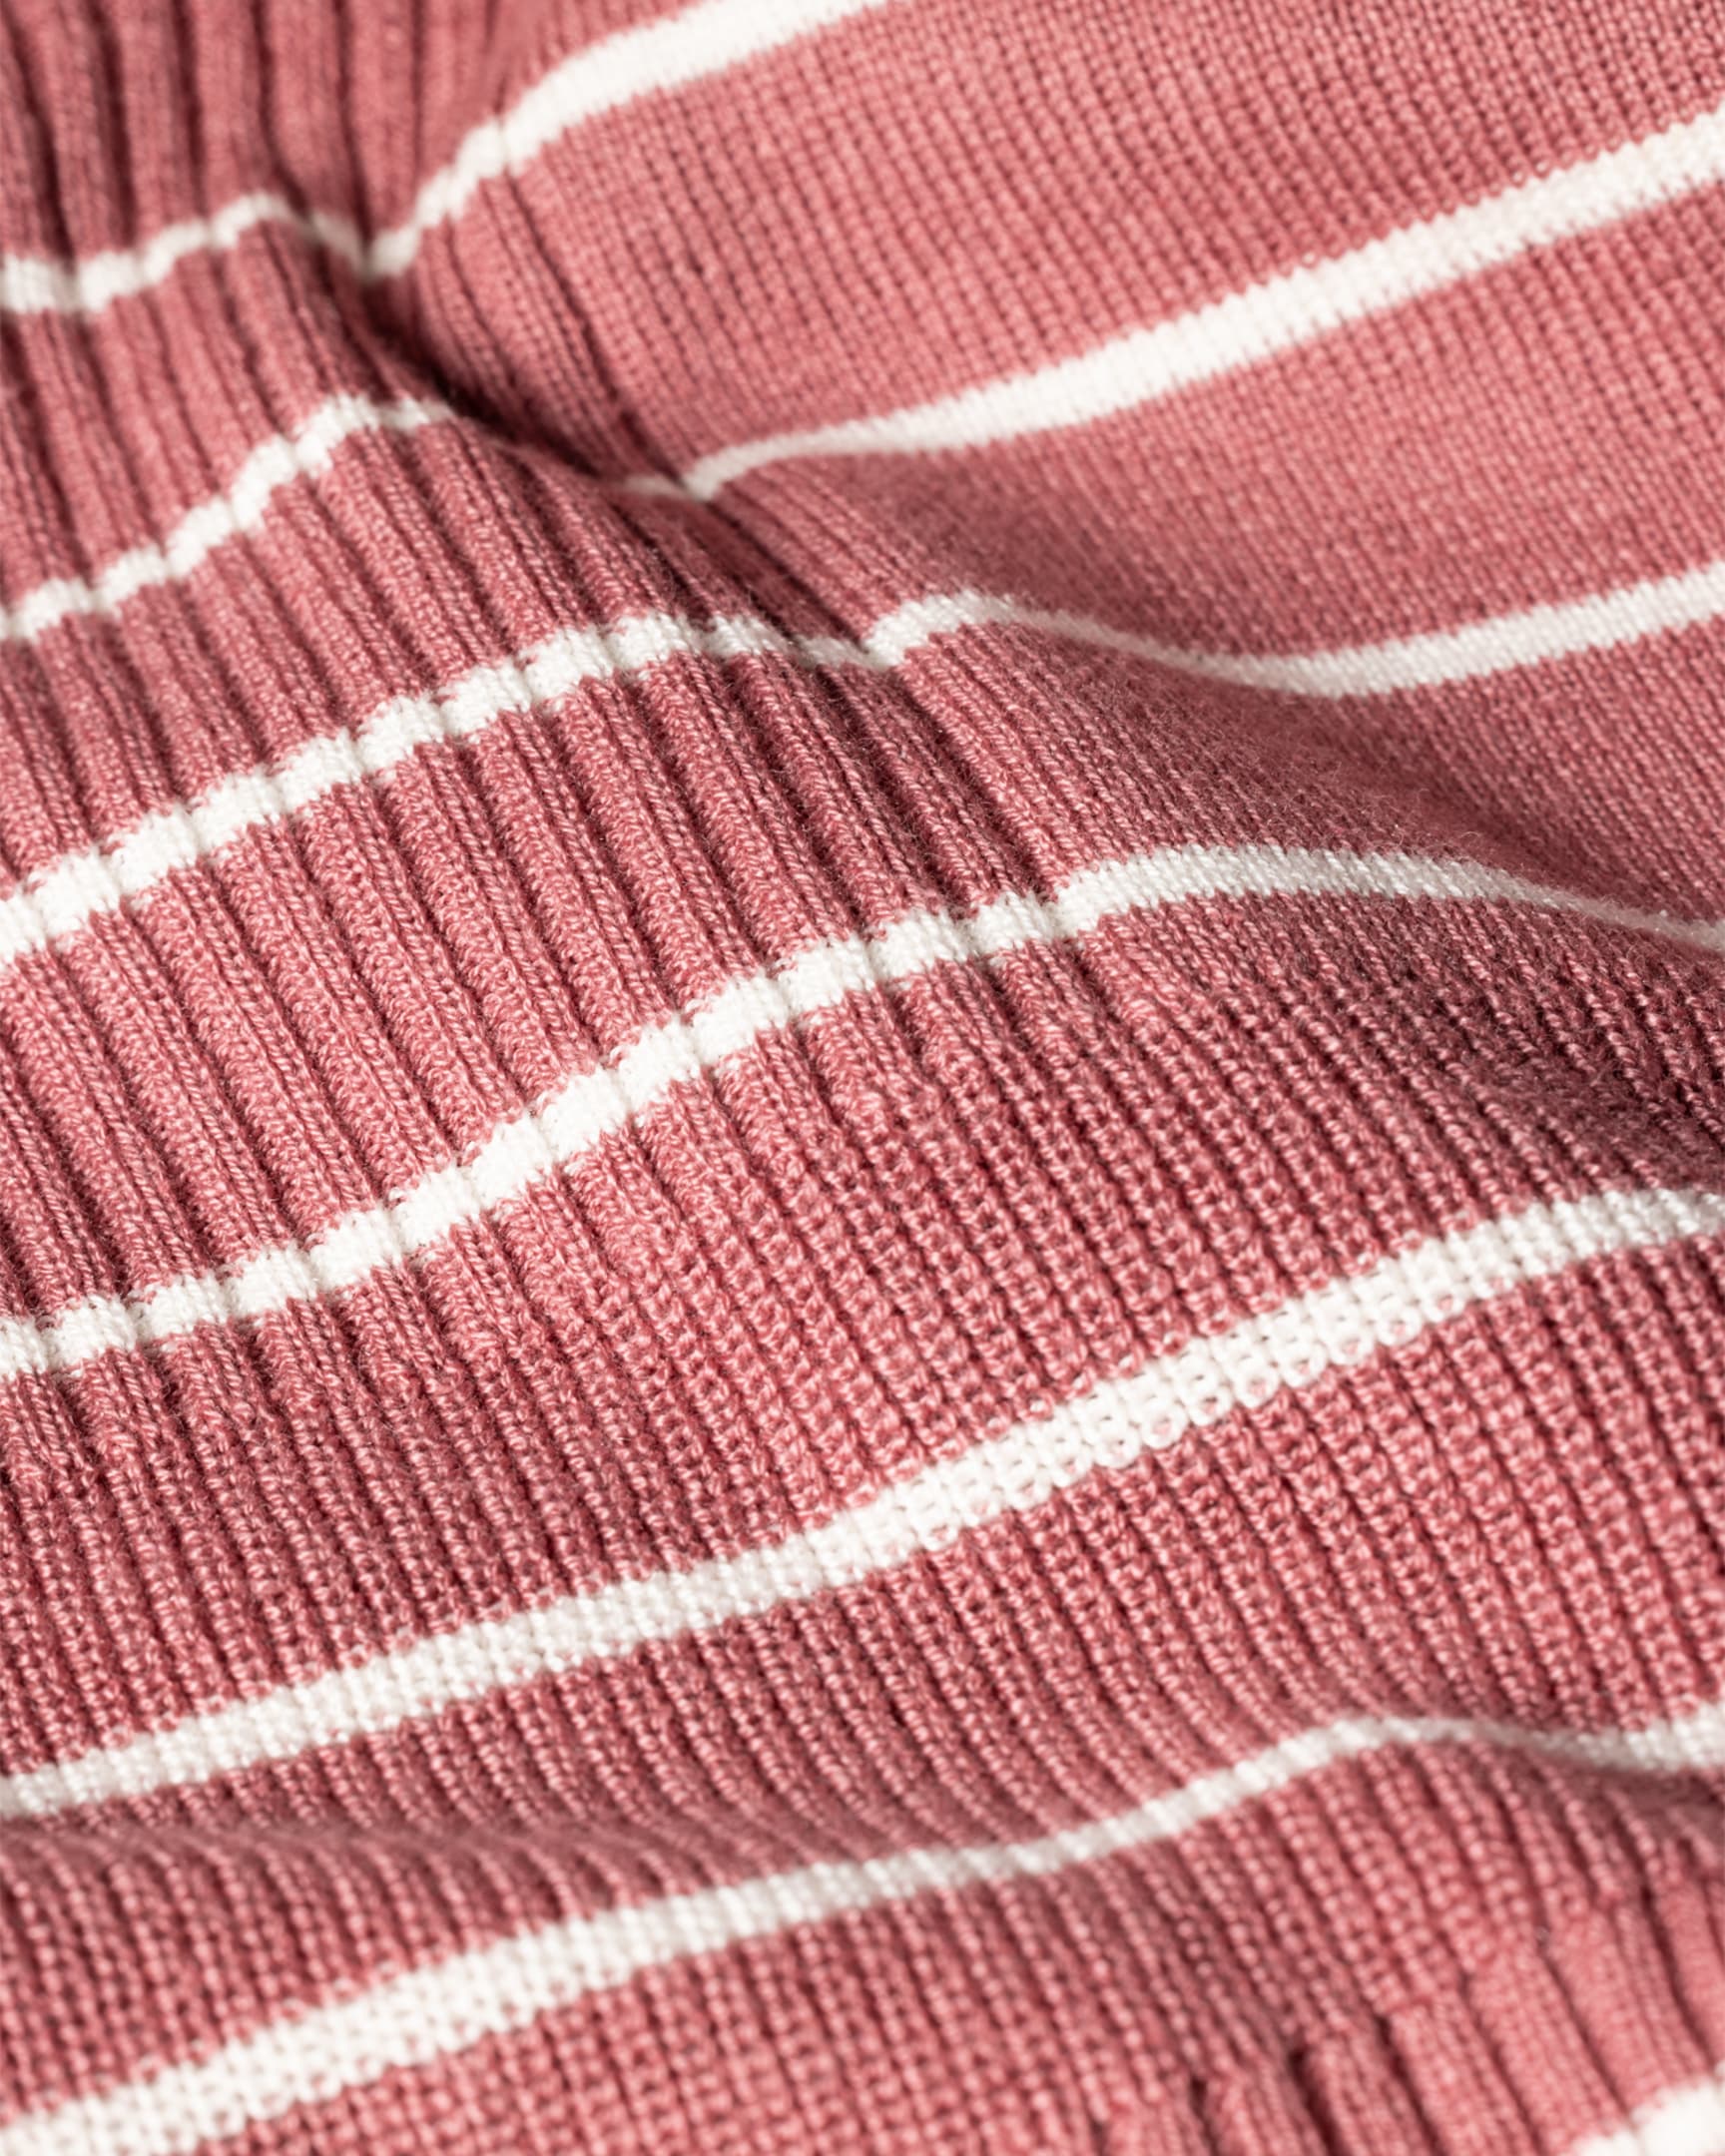 Detail View - Women's Dusky Pink Stripe Knitted Top Paul Smith